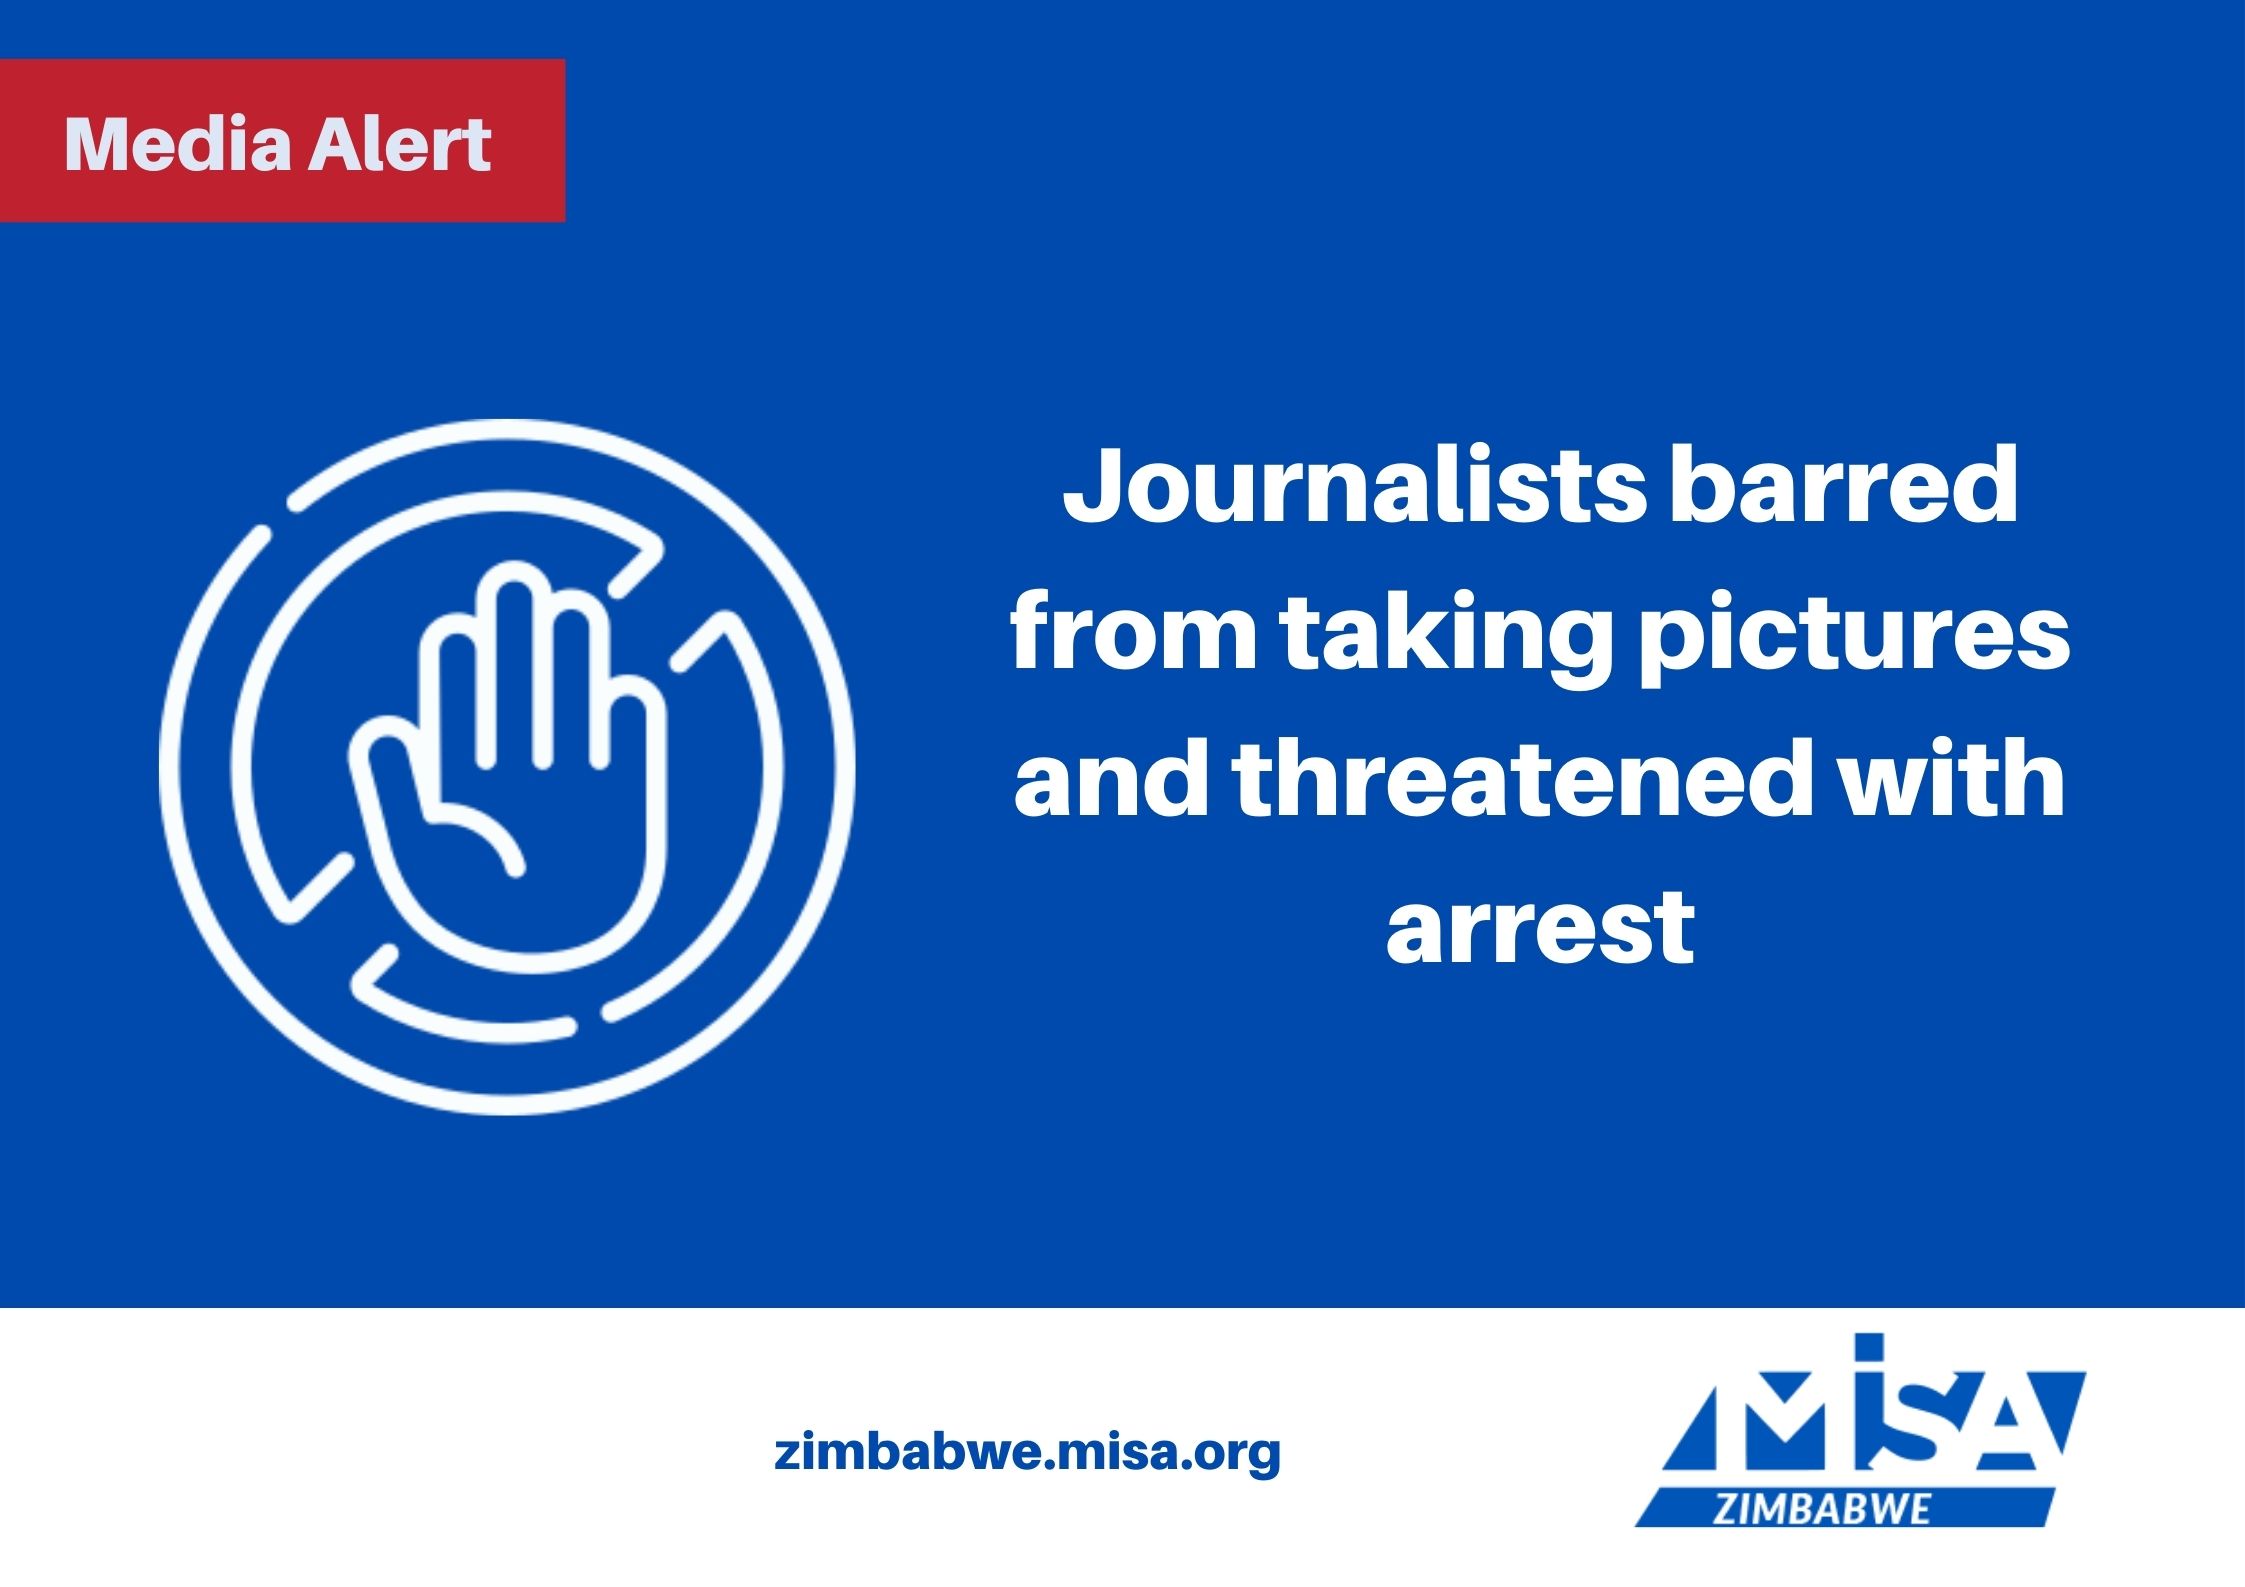 Journalists barred from taking pictures and threatened with arrest